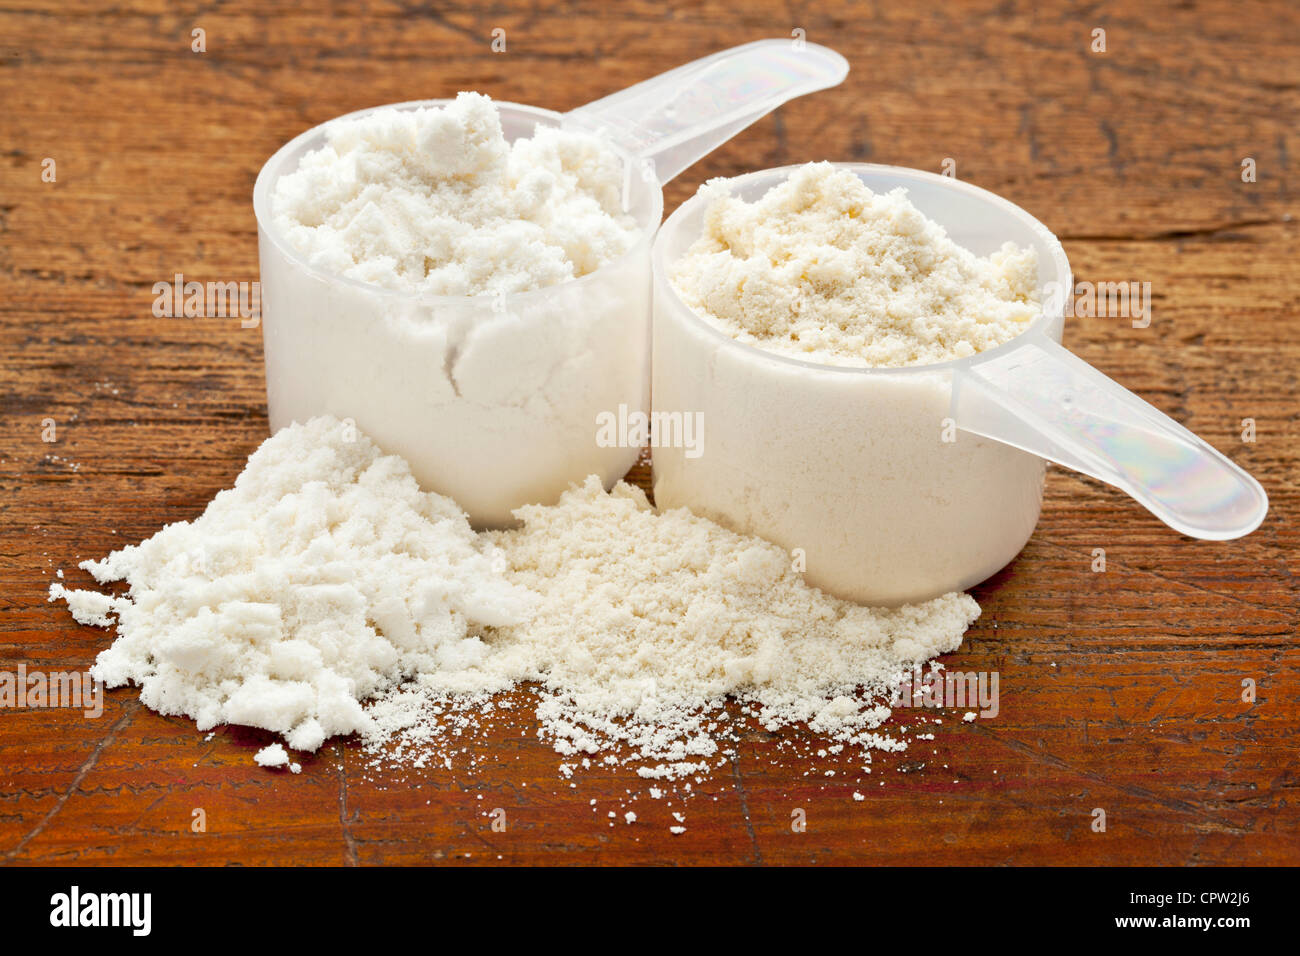 two measuring scoops of whey protein powder - isolate (white) and concentrate (creamy) Stock Photo